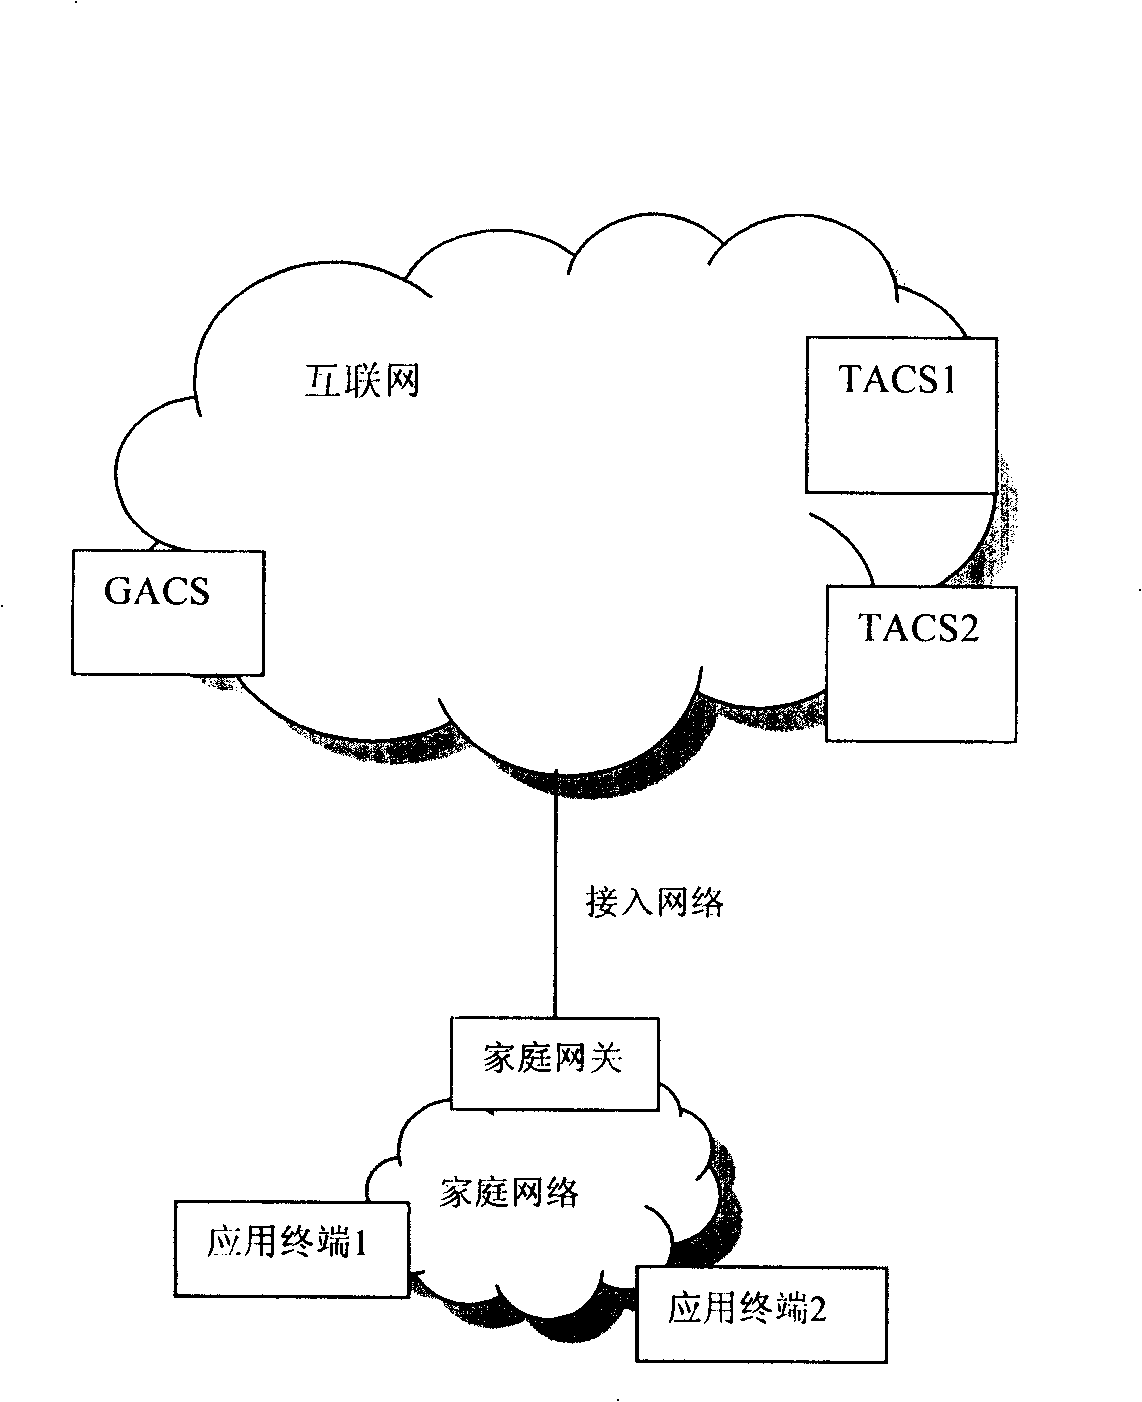 Device, system and method for automatically configuring application terminal in family network